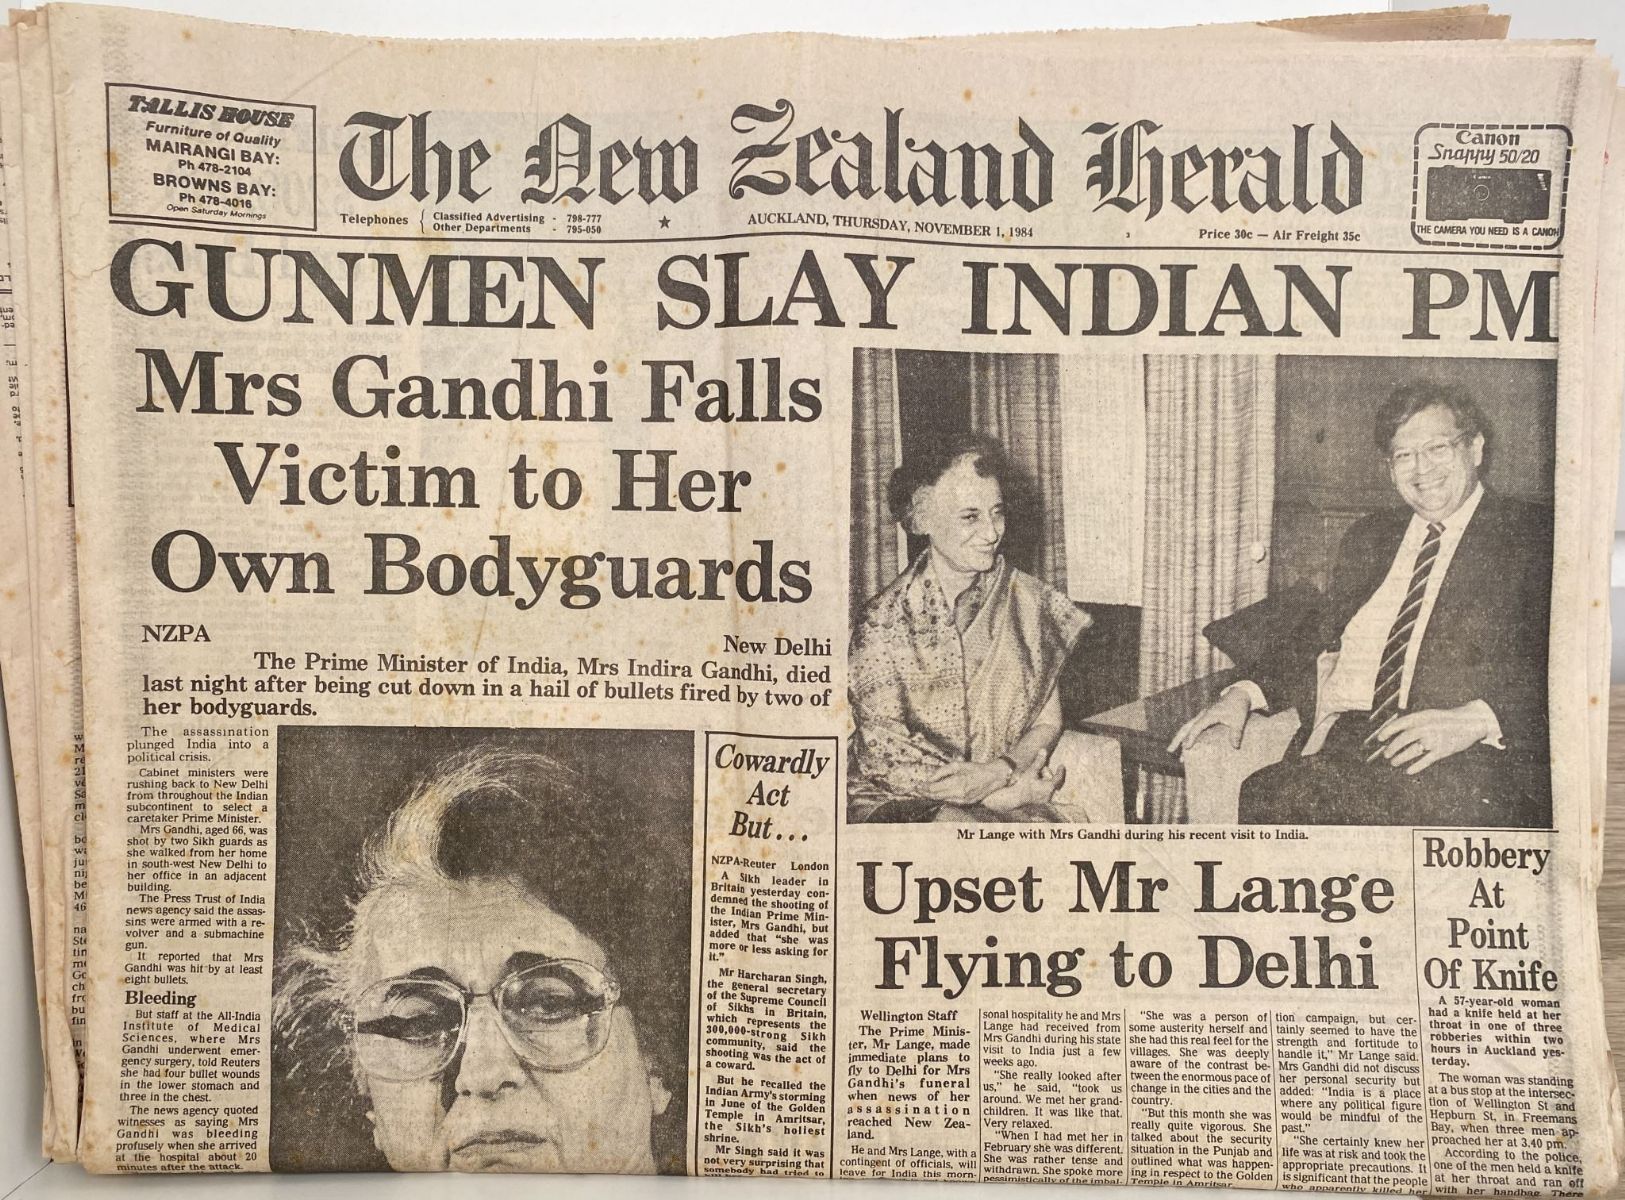 OLD NEWSPAPER: The New Zealand Herald, 1st November 1984 - Indian PM Shot dead